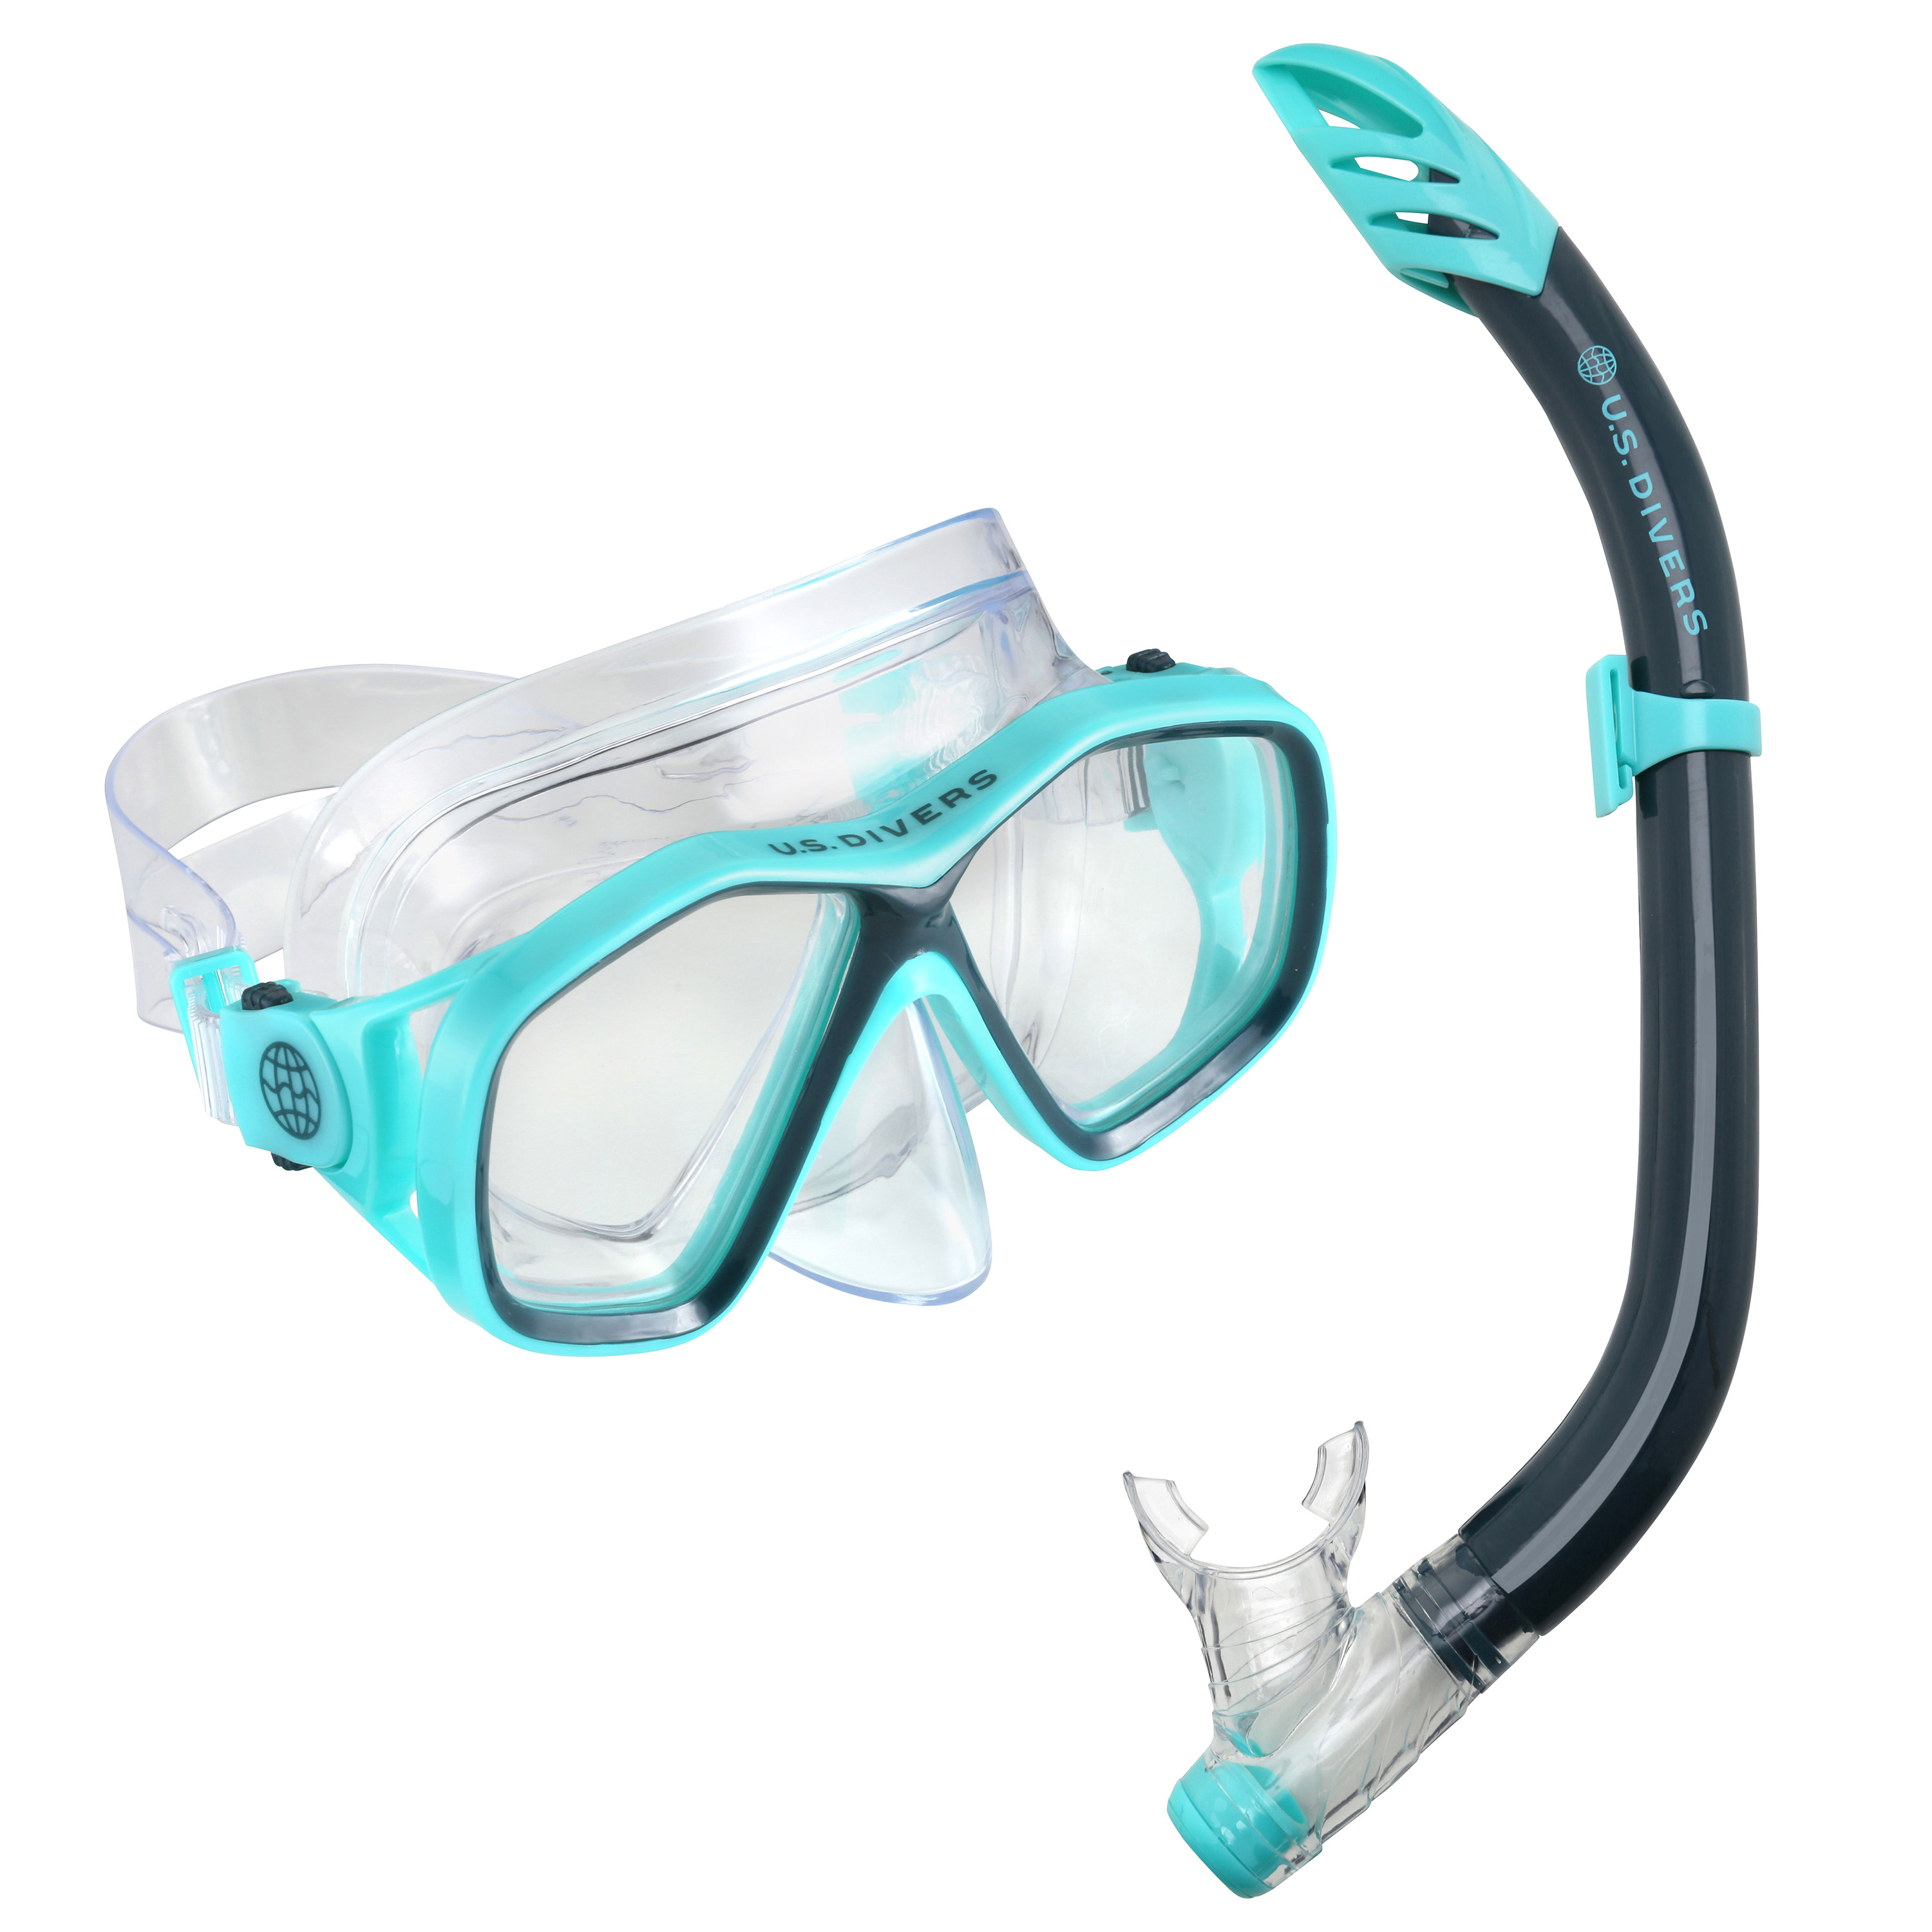 U.S. Divers Playa Adult Snorkeling Combo - Mask and Snorkel Included (Teal & Blue) - image 1 of 10